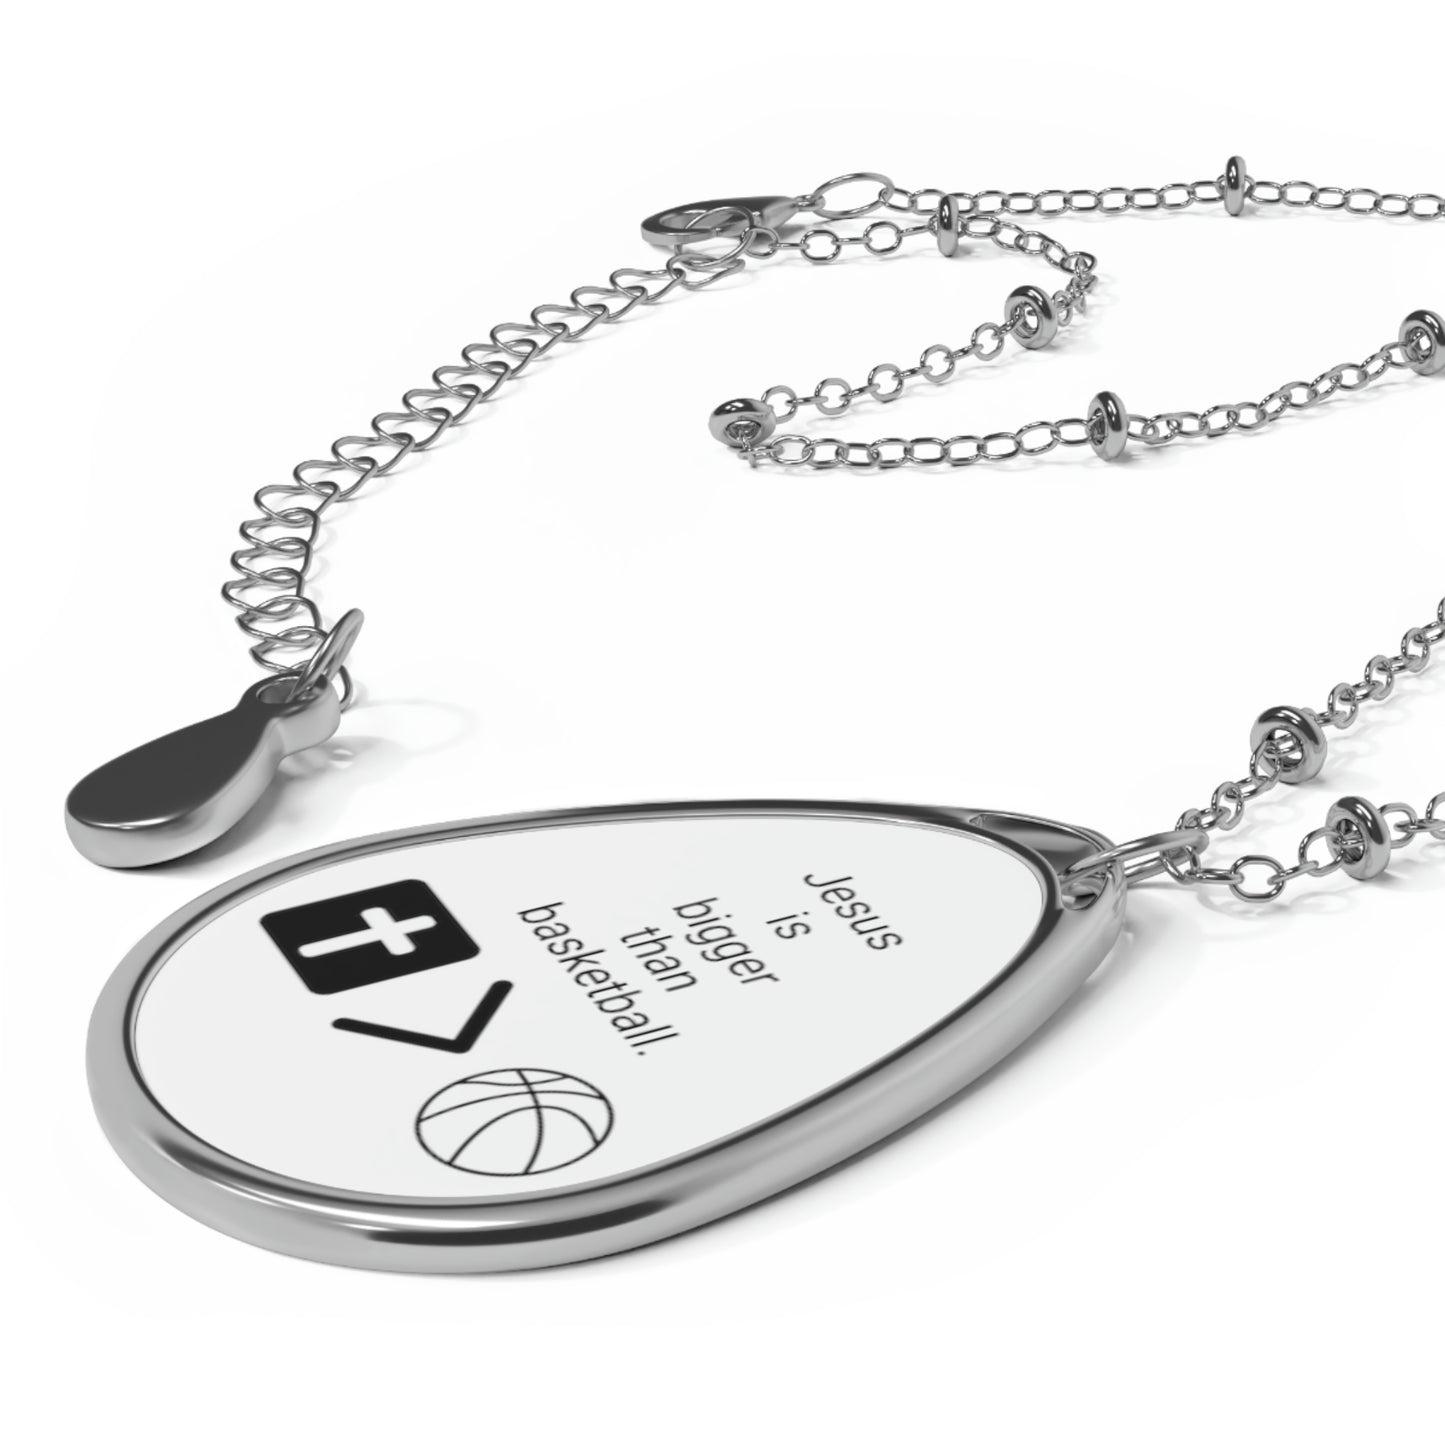 Jesus is bigger than basketball Oval Necklace